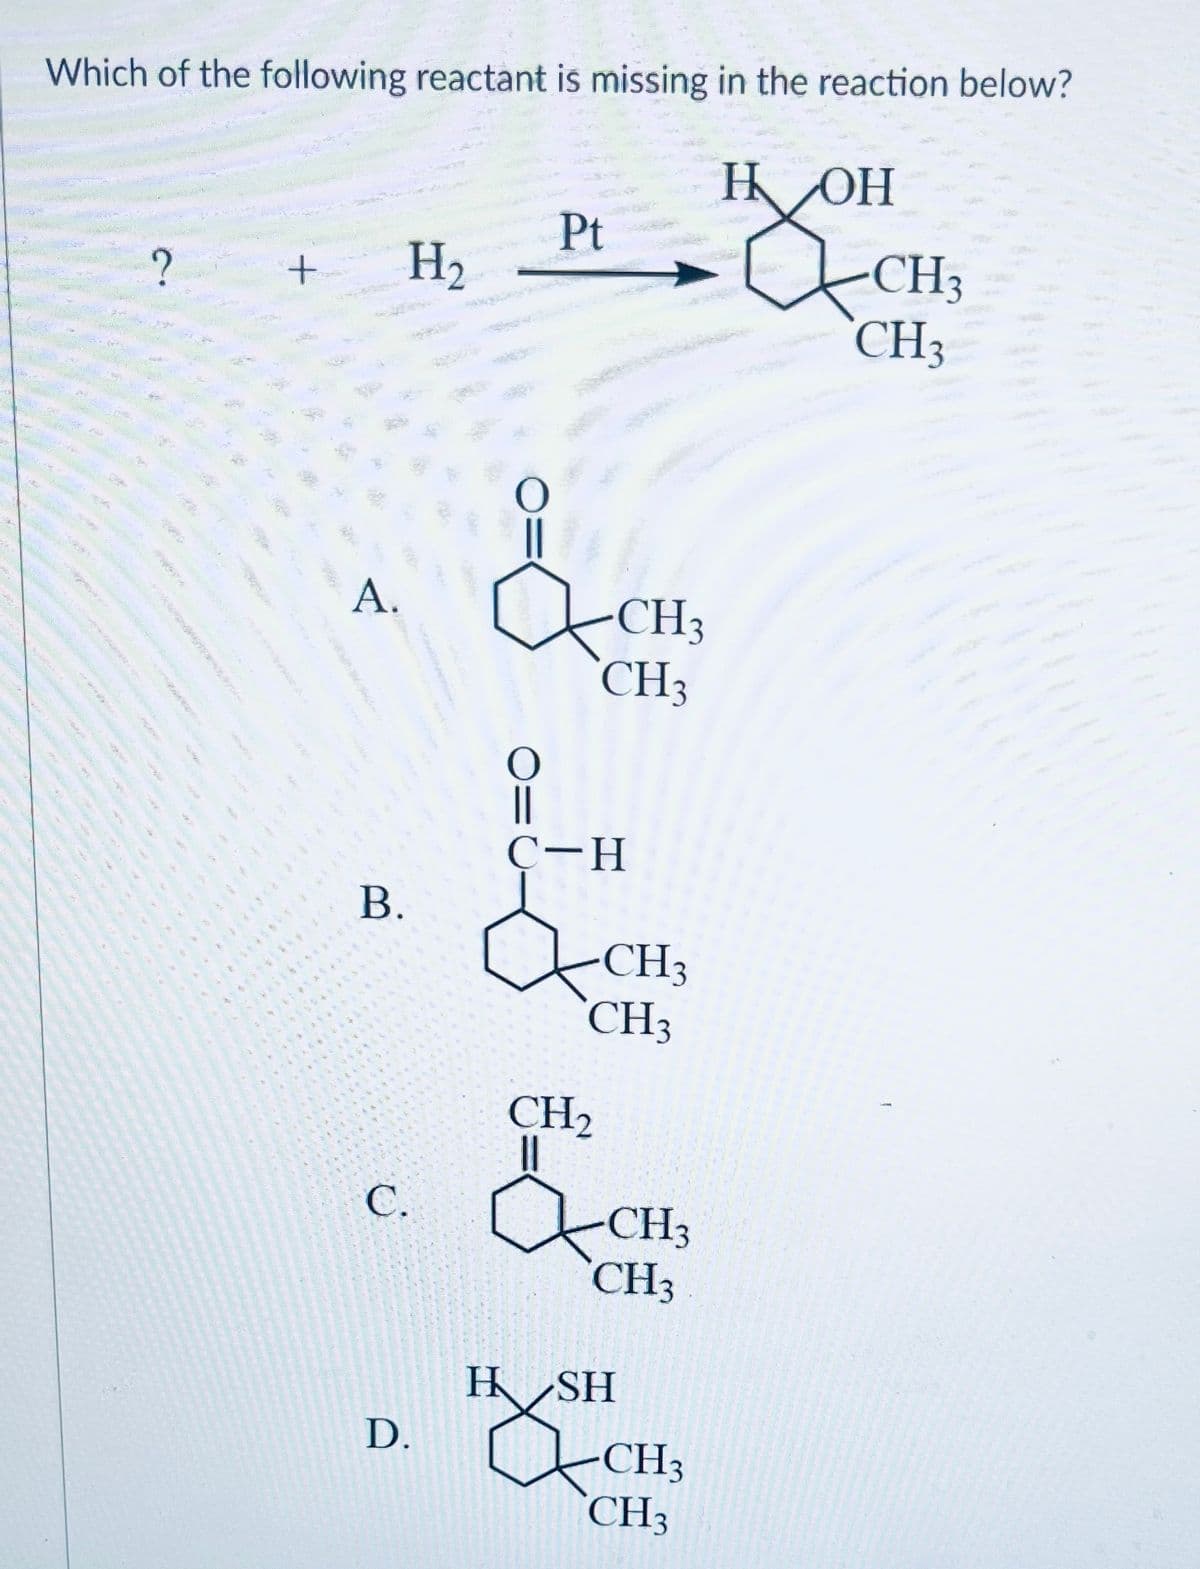 Which of the following reactant is missing in the reaction below?
HOH
29
www
?
+
A.
B.
******
VAN
***
H₂
Pt
2
D.
CH3
CH₂
C-H
CH3
CH3
CH₂
||
C. CH3
CH3
H SH
CH3
CH3
CH3
CH3